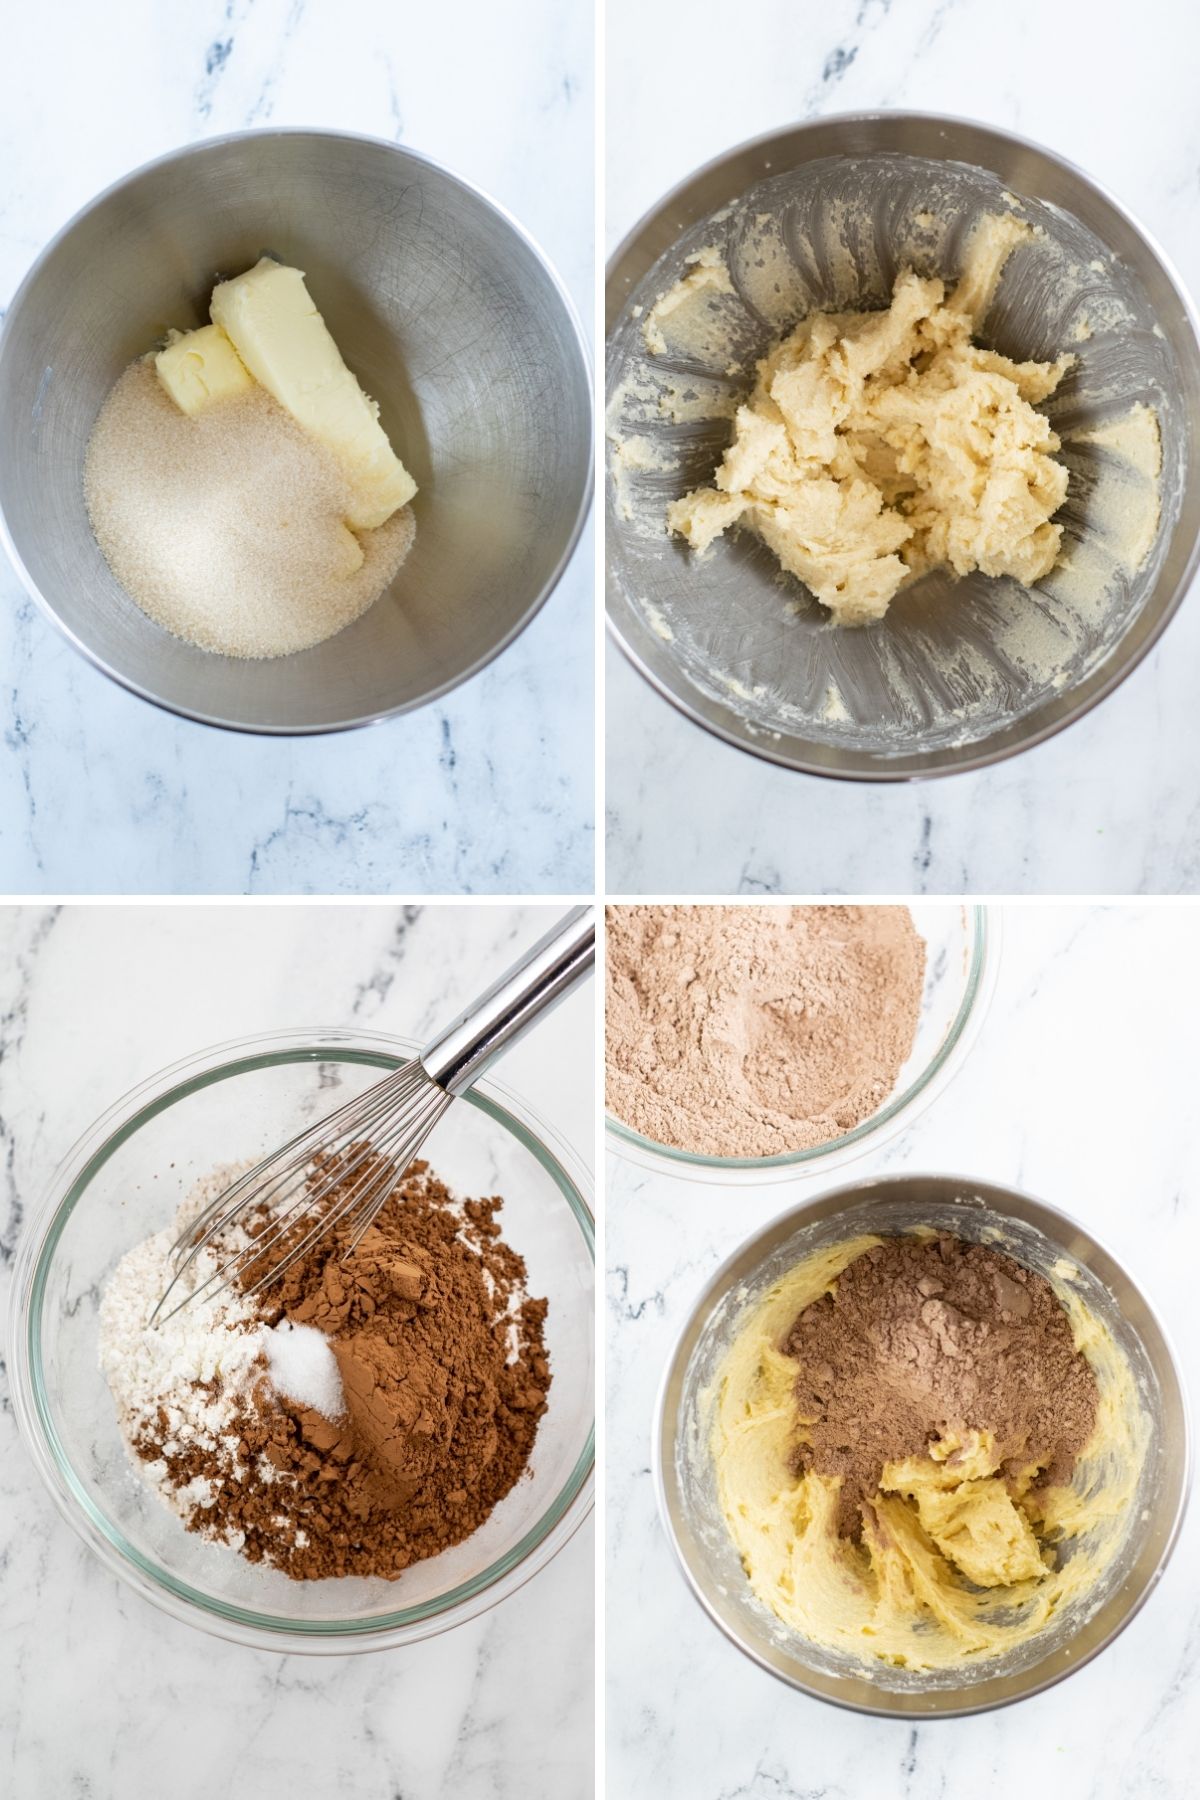 butter and sugar in mixing bowl, stirred together; cocoa powder and other ingredients; cocoa mixture and flour mixture together in bowl